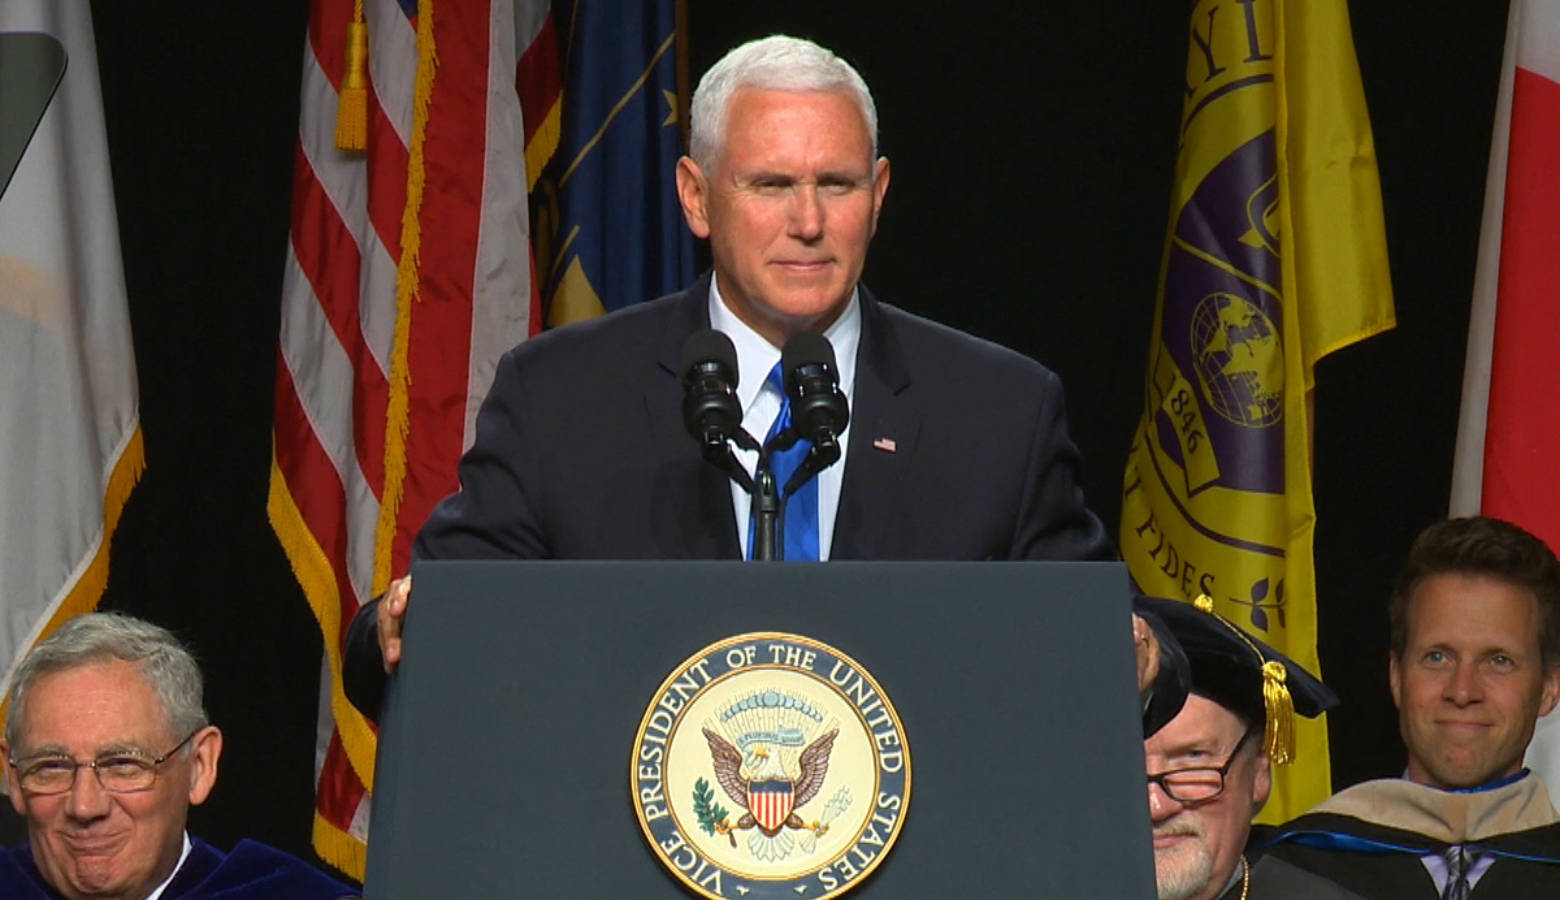 Pence Tells Taylor University Graduates To ‘Stand Up’ For Faith